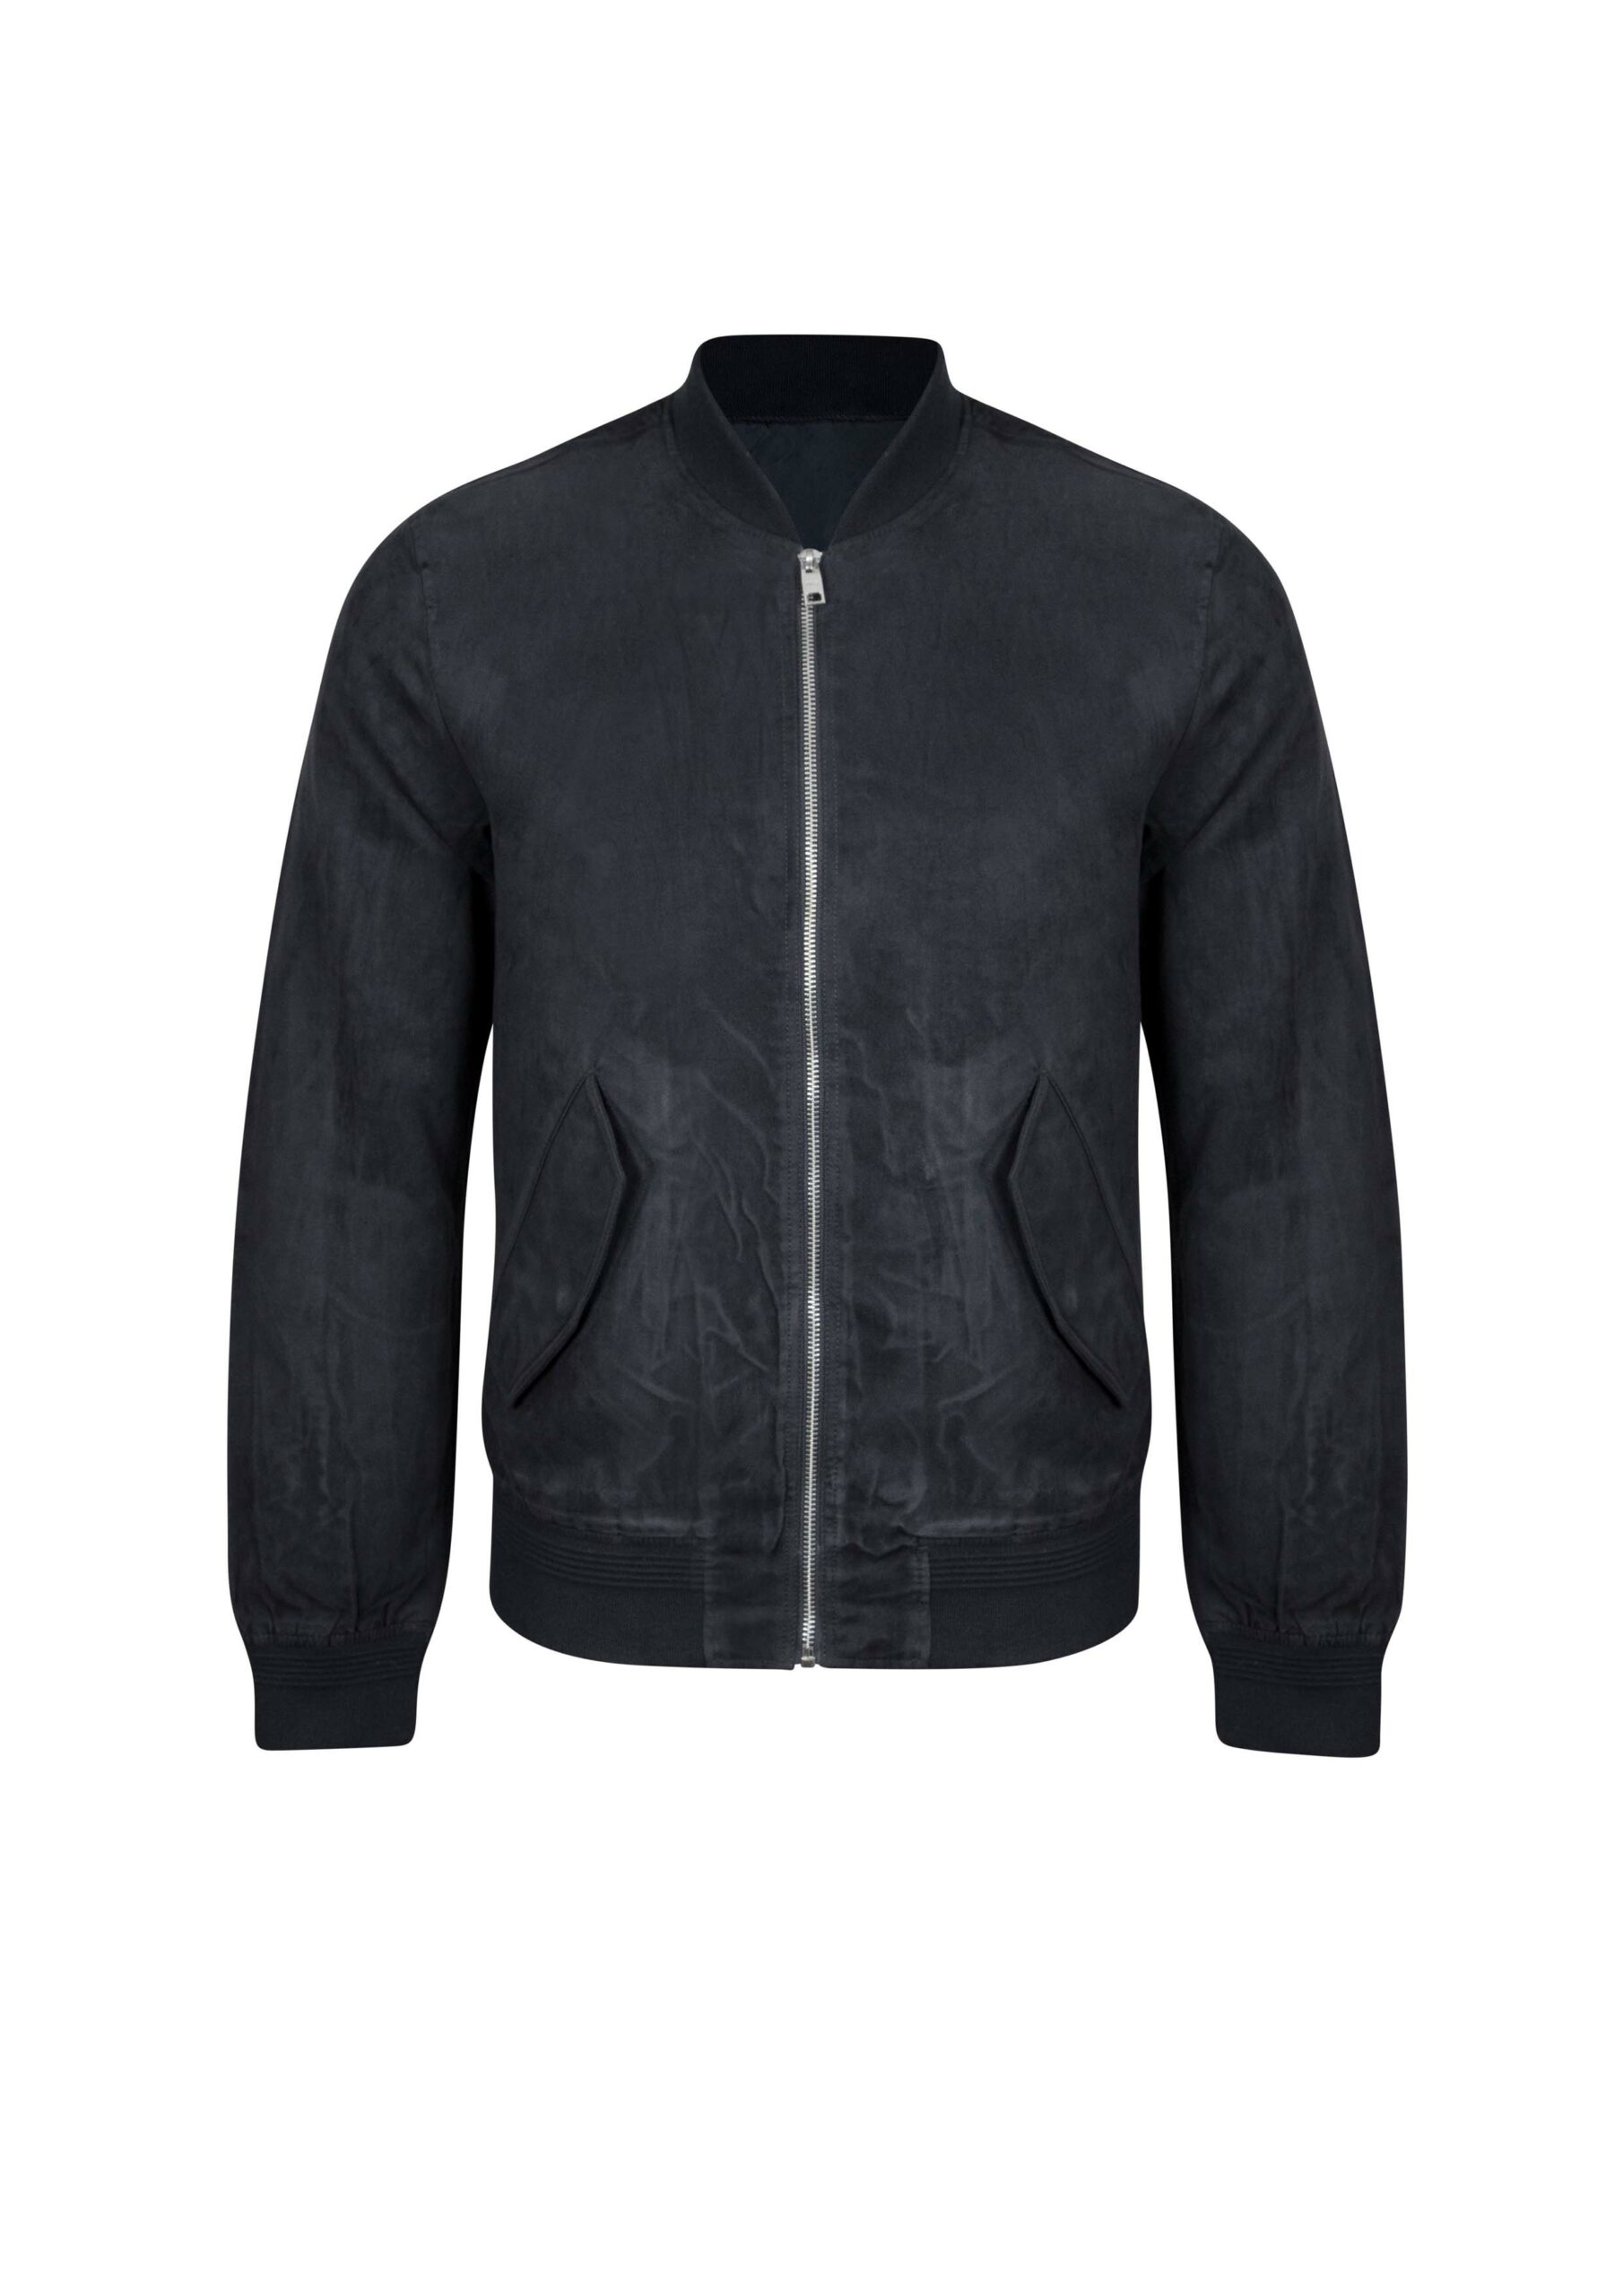 Mens Jacket - Artisan Outfitters Ltd